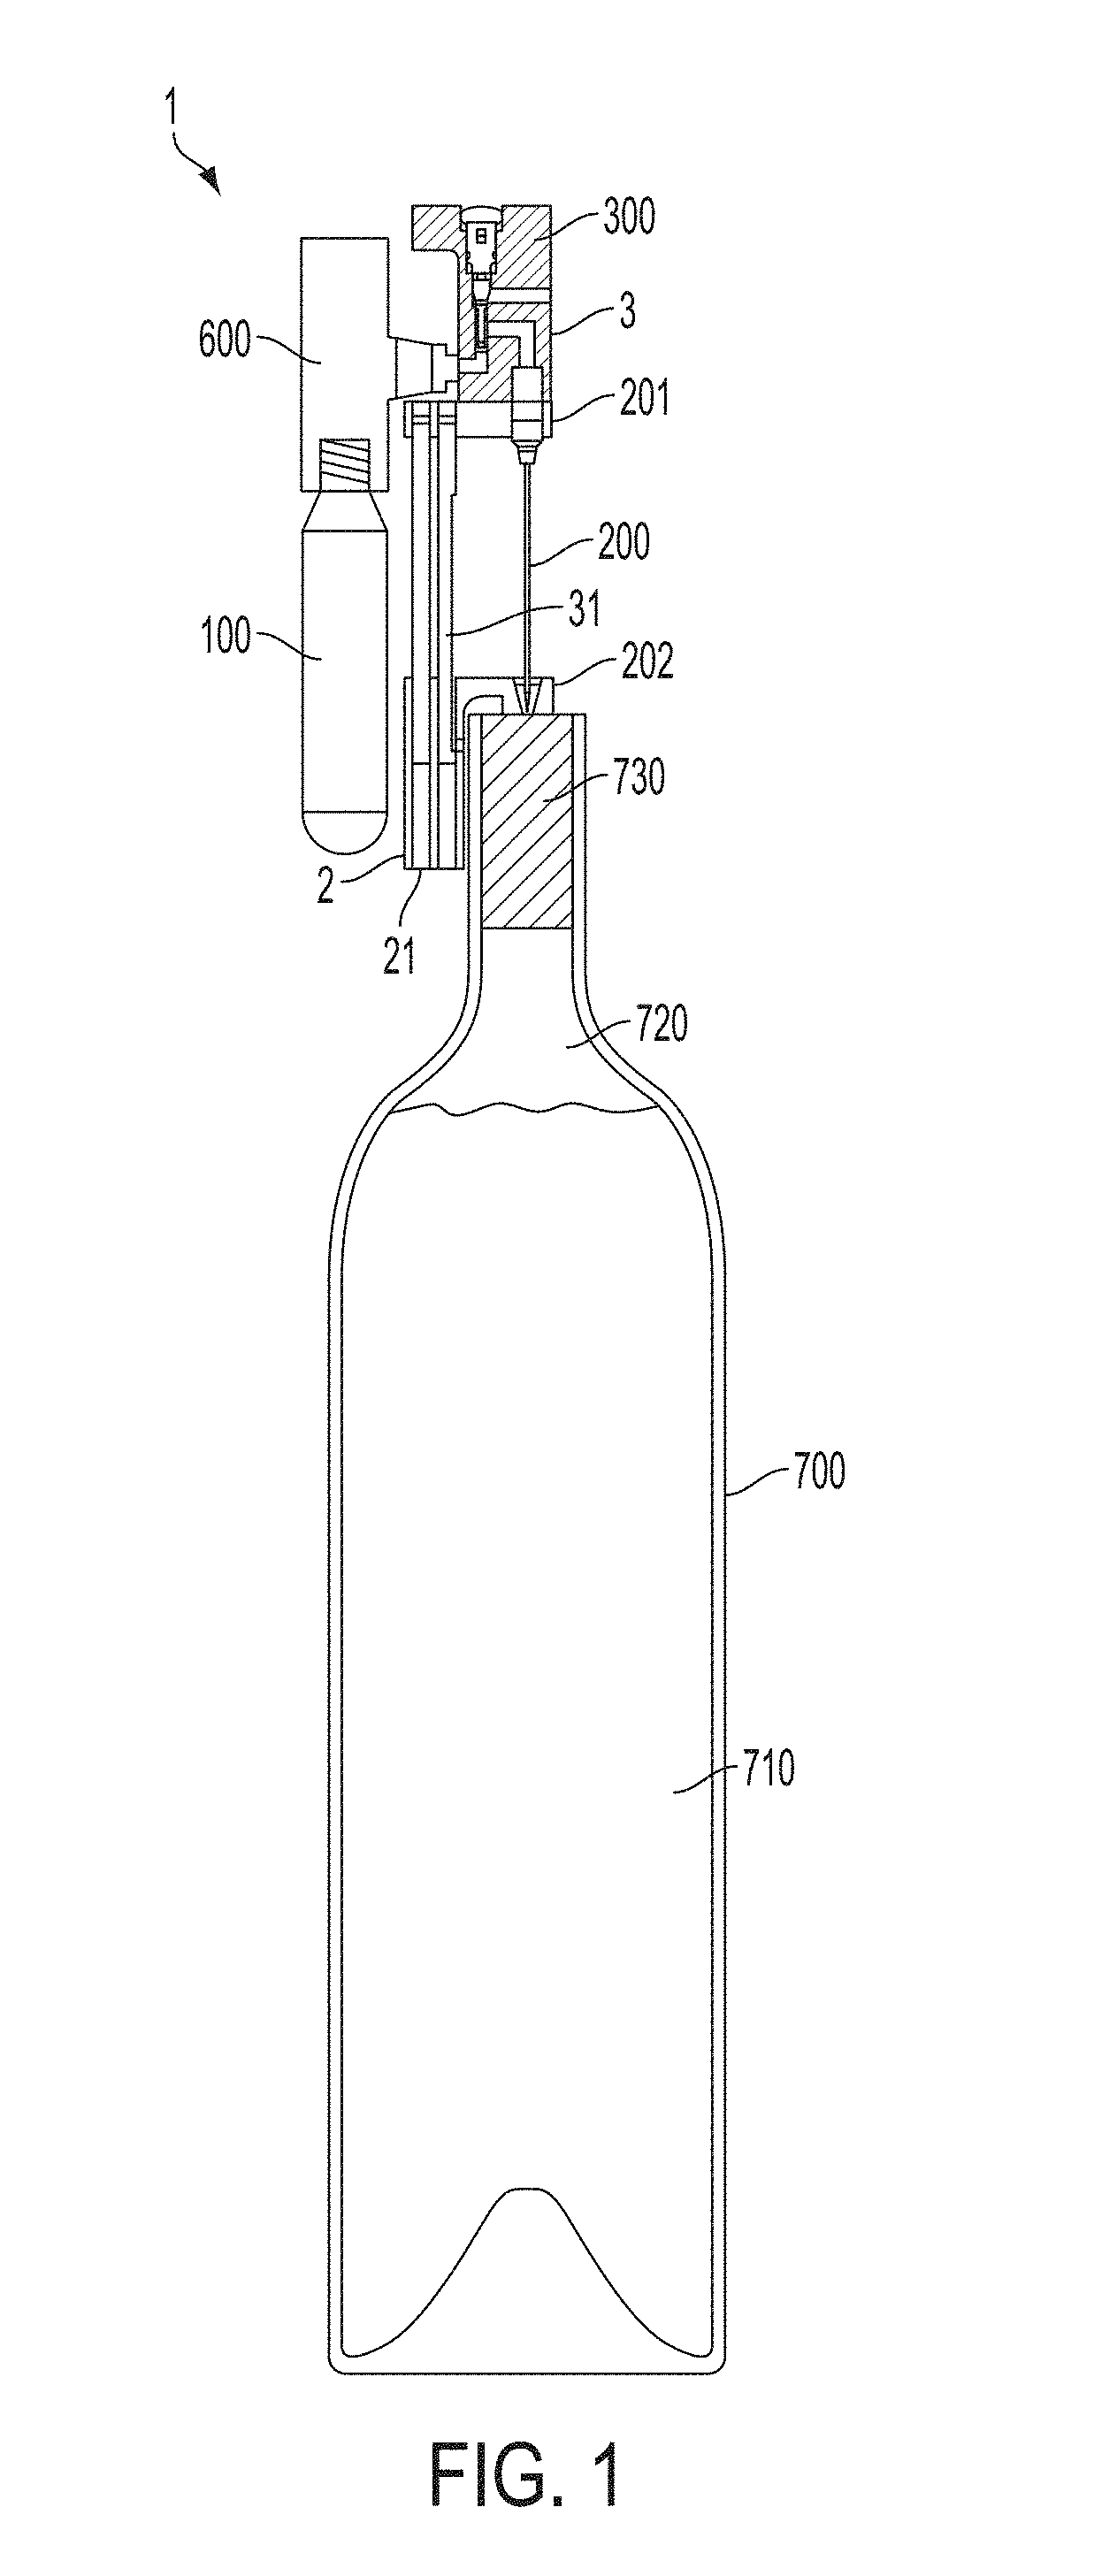 Method for extracting beverage from a bottle